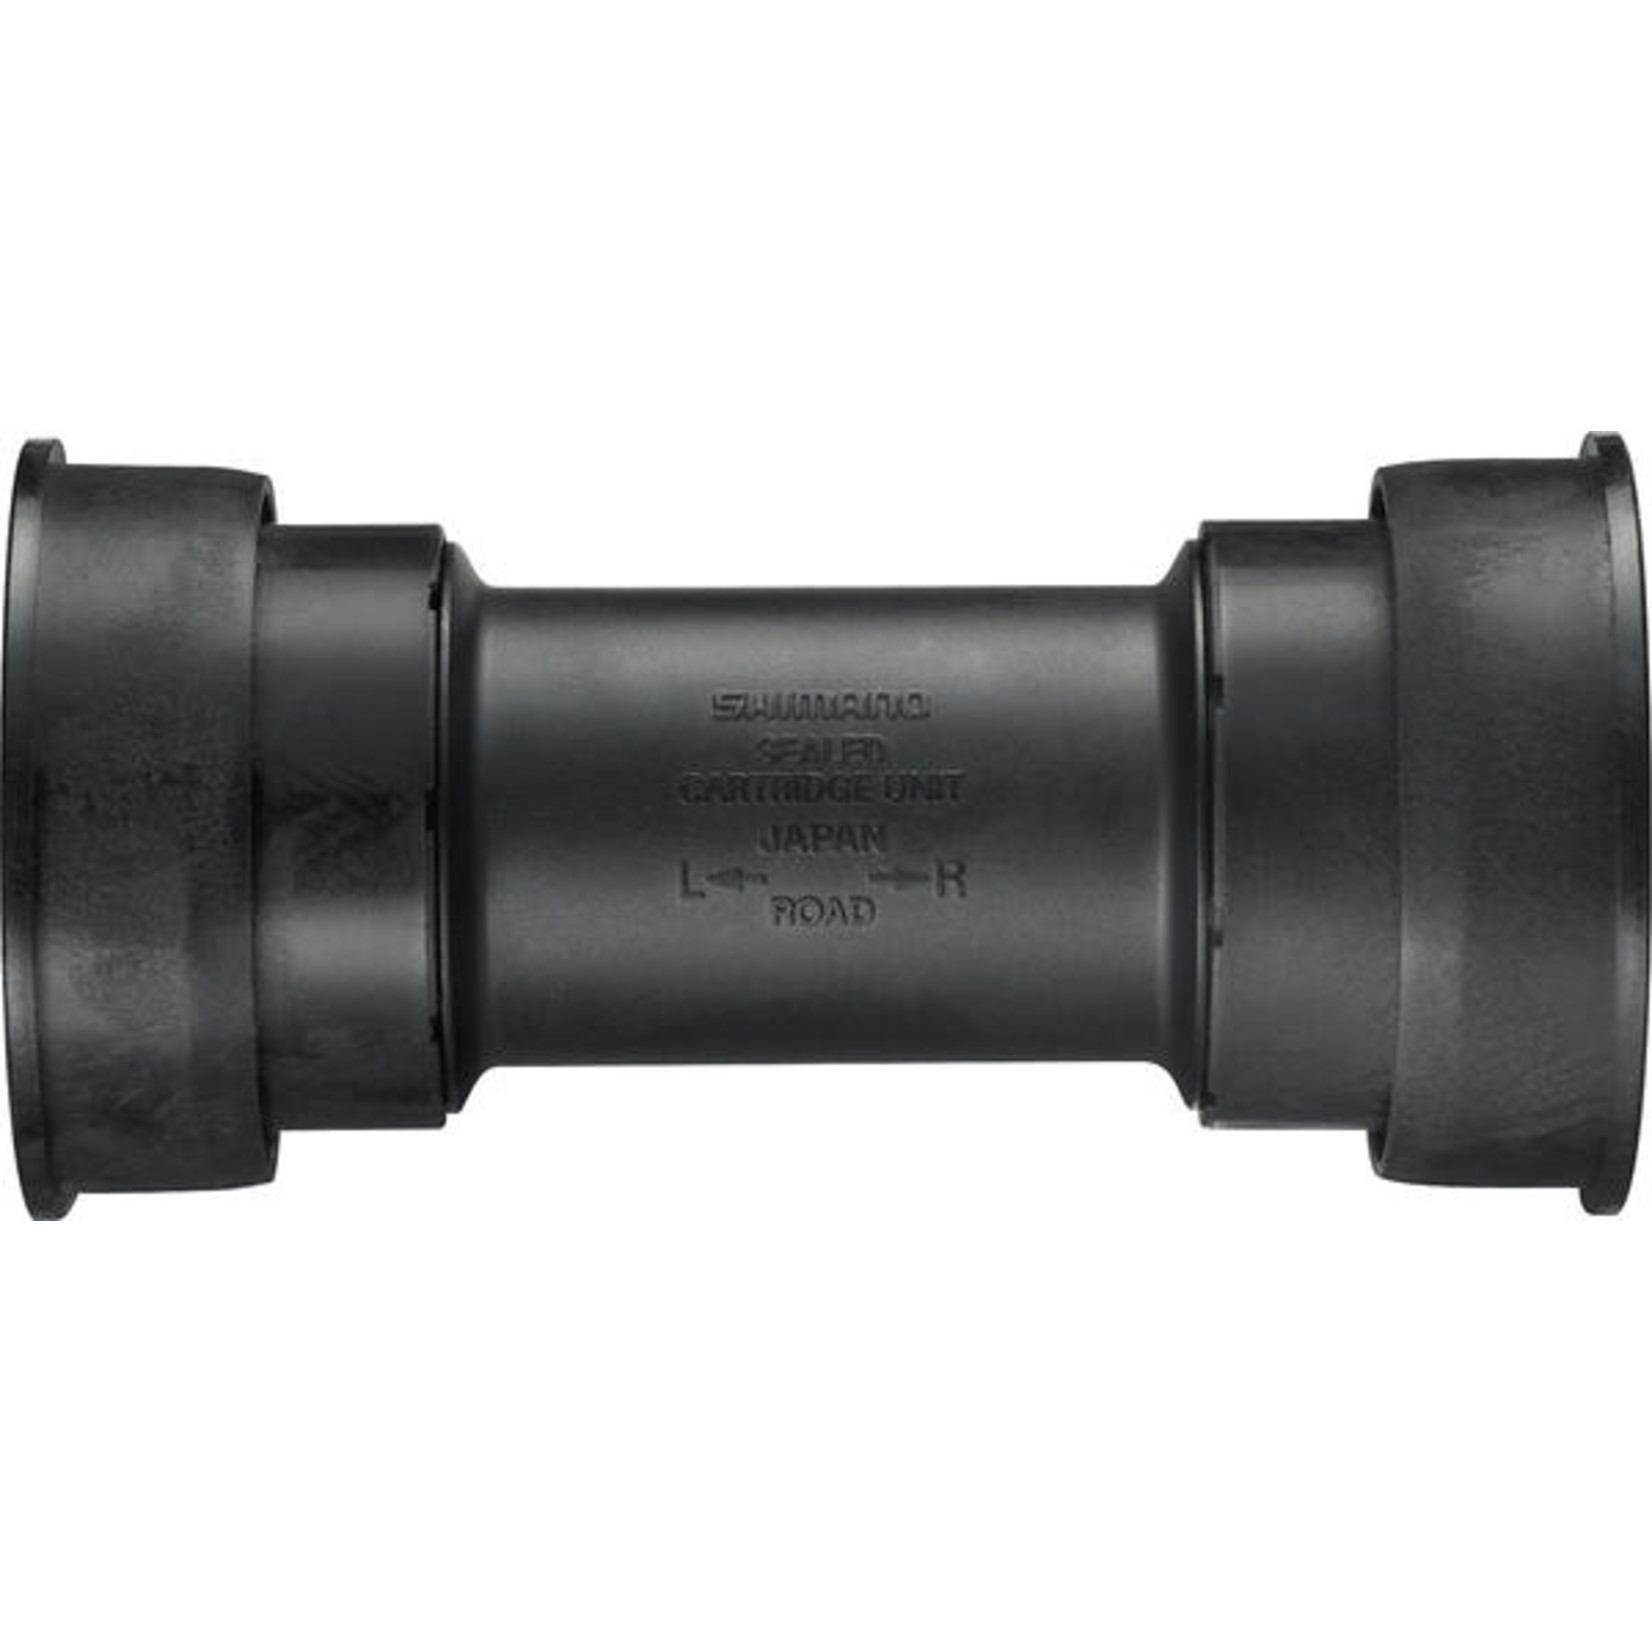 Shimano BOTTOM BRACKET, SM-BB92-41B, PRESS FIT TYPE FOR ROAD, RIGHT & LEFT ADAPTER